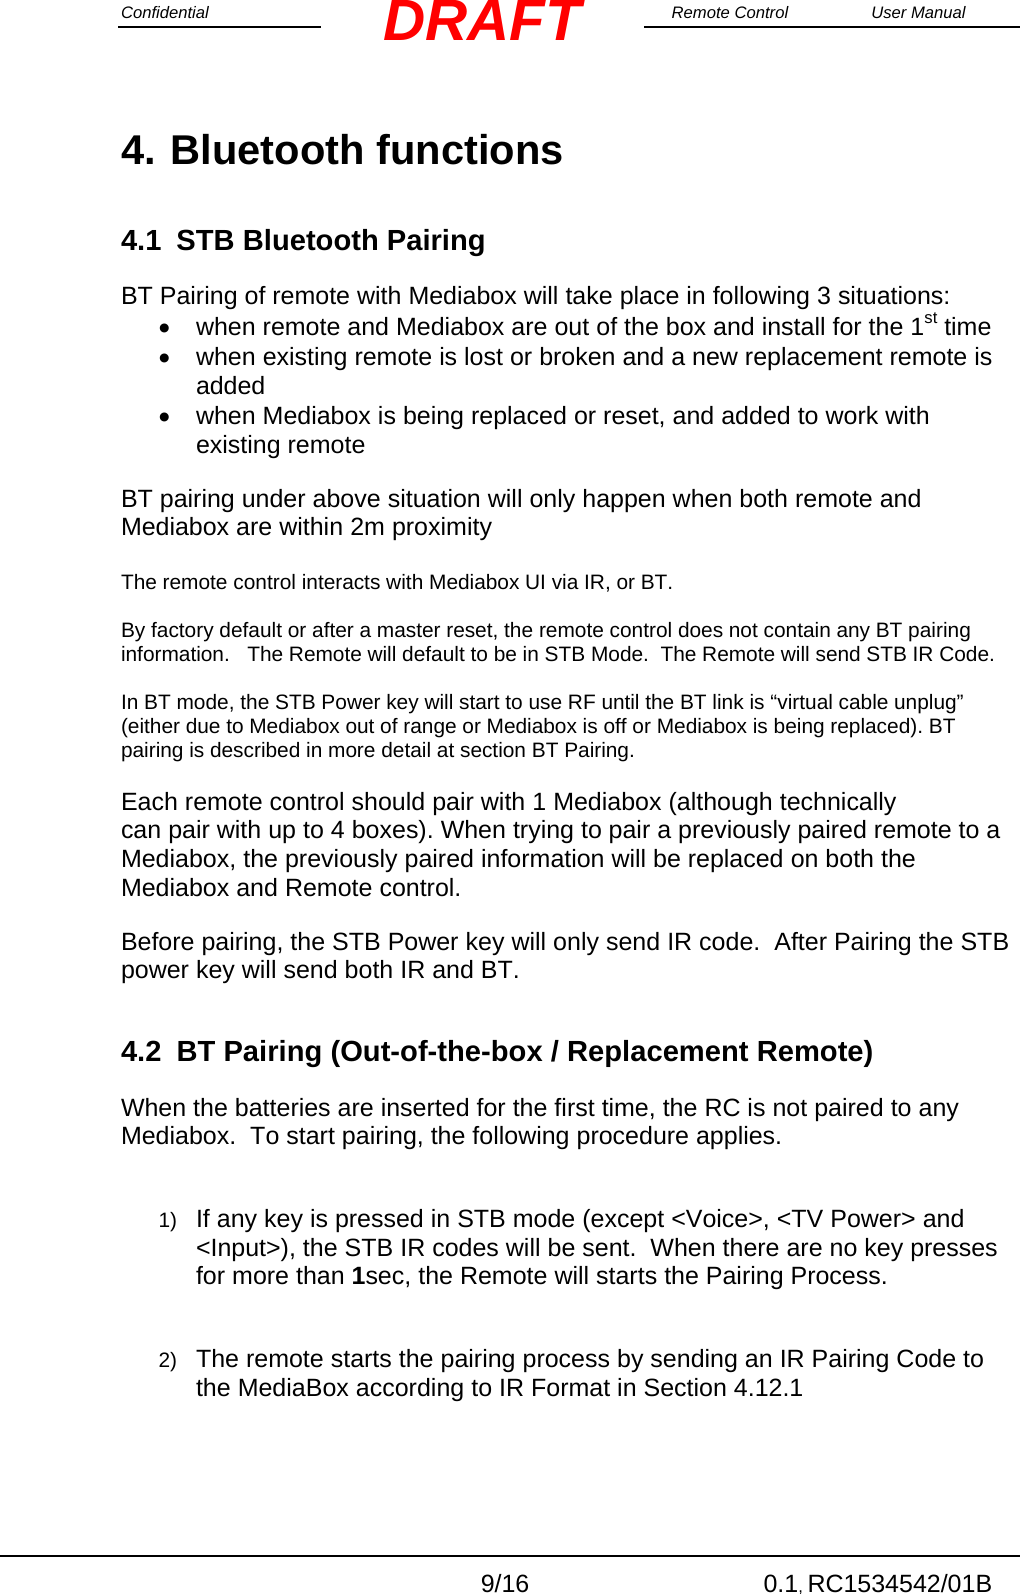 Confidential                                                                                                    Remote Control  User Manual  9/16 0.1, RC1534542/01B DRAFT4. Bluetooth functions 4.1  STB Bluetooth Pairing BT Pairing of remote with Mediabox will take place in following 3 situations:    when remote and Mediabox are out of the box and install for the 1st time   when existing remote is lost or broken and a new replacement remote is added   when Mediabox is being replaced or reset, and added to work with existing remote BT pairing under above situation will only happen when both remote and Mediabox are within 2m proximity  The remote control interacts with Mediabox UI via IR, or BT.   By factory default or after a master reset, the remote control does not contain any BT pairing information.   The Remote will default to be in STB Mode.  The Remote will send STB IR Code.  In BT mode, the STB Power key will start to use RF until the BT link is “virtual cable unplug” (either due to Mediabox out of range or Mediabox is off or Mediabox is being replaced). BT pairing is described in more detail at section BT Pairing. Each remote control should pair with 1 Mediabox (although technically can pair with up to 4 boxes). When trying to pair a previously paired remote to a Mediabox, the previously paired information will be replaced on both the Mediabox and Remote control. Before pairing, the STB Power key will only send IR code.  After Pairing the STB power key will send both IR and BT. 4.2  BT Pairing (Out-of-the-box / Replacement Remote) When the batteries are inserted for the first time, the RC is not paired to any Mediabox.  To start pairing, the following procedure applies.  1)  If any key is pressed in STB mode (except &lt;Voice&gt;, &lt;TV Power&gt; and &lt;Input&gt;), the STB IR codes will be sent.  When there are no key presses for more than 1sec, the Remote will starts the Pairing Process.  2)  The remote starts the pairing process by sending an IR Pairing Code to the MediaBox according to IR Format in Section 4.12.1  